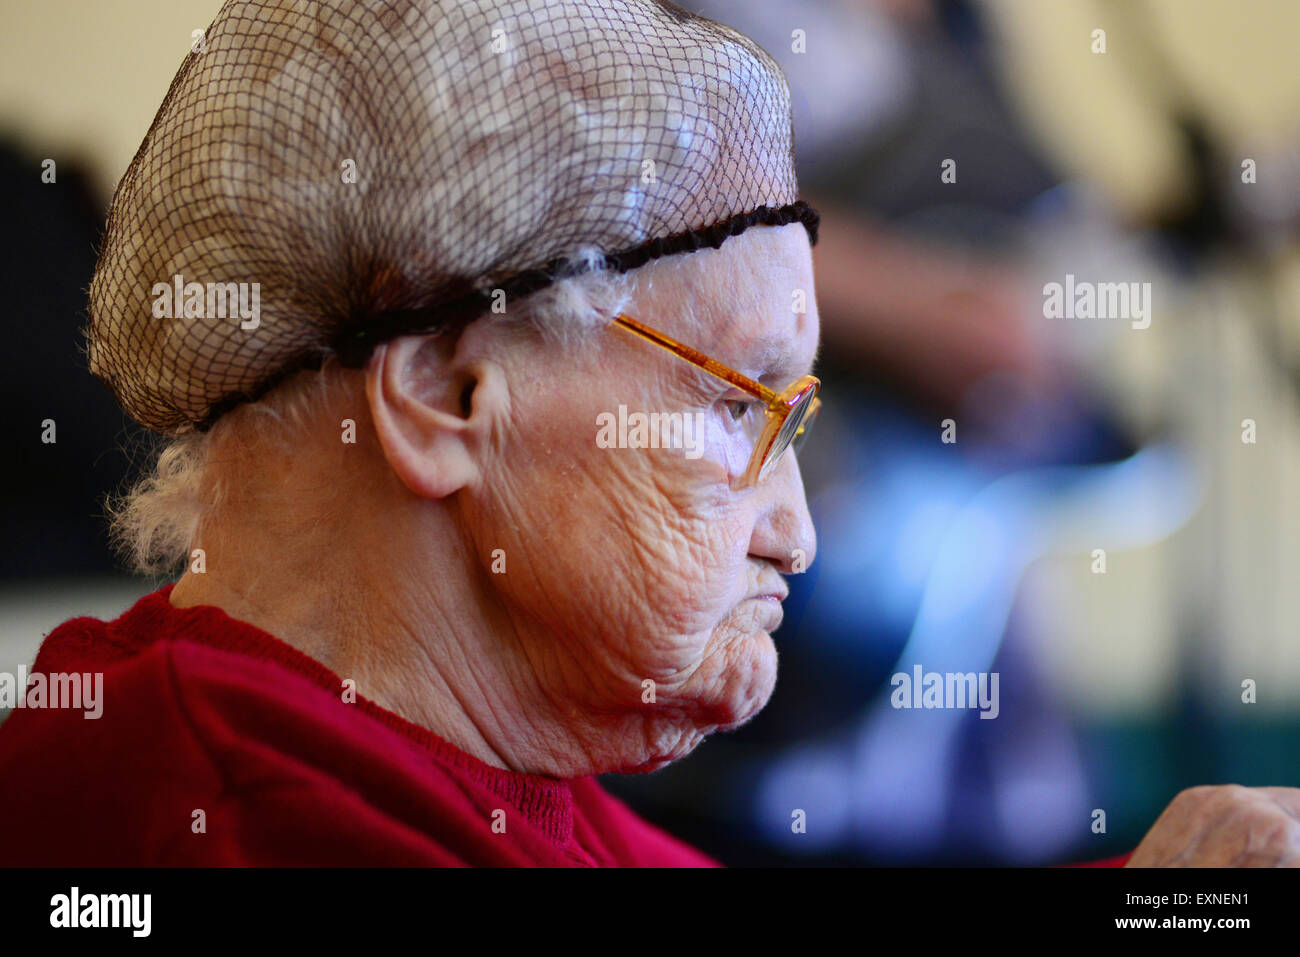 An elderly lady with dementia in a care home. Picture: Scott Bairstow/Alamy Stock Photo